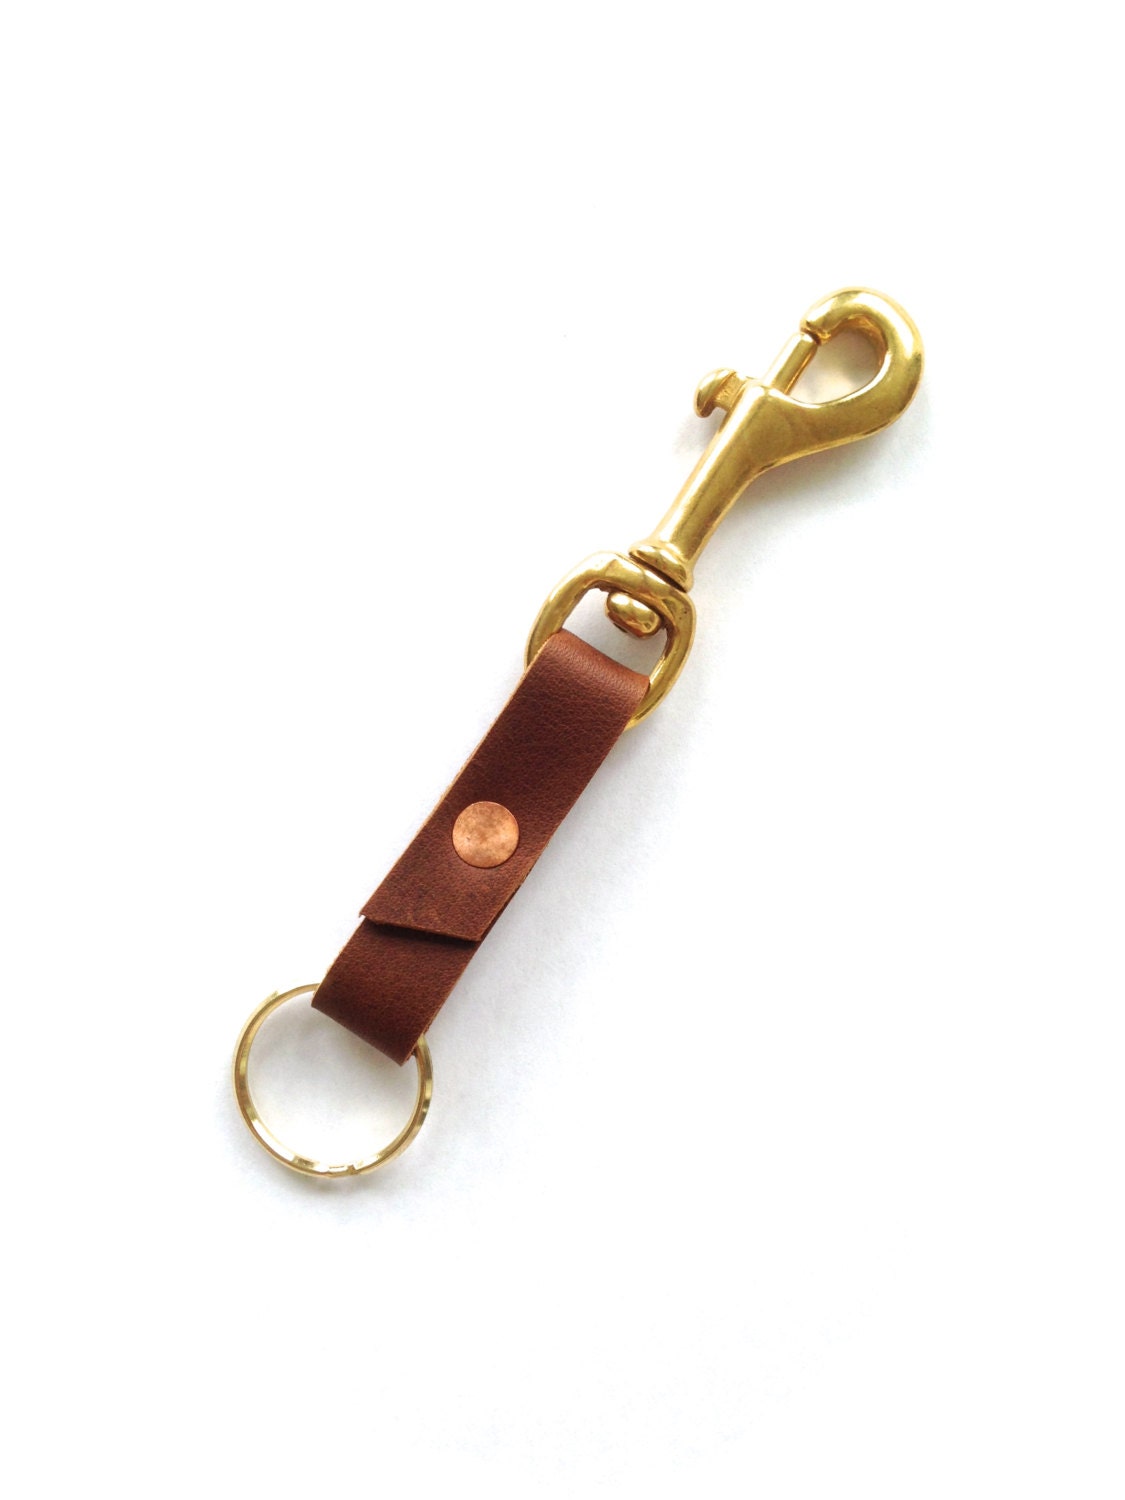 Large Leather Key Fob copper rivet brass by ButterbeanLeatherCo